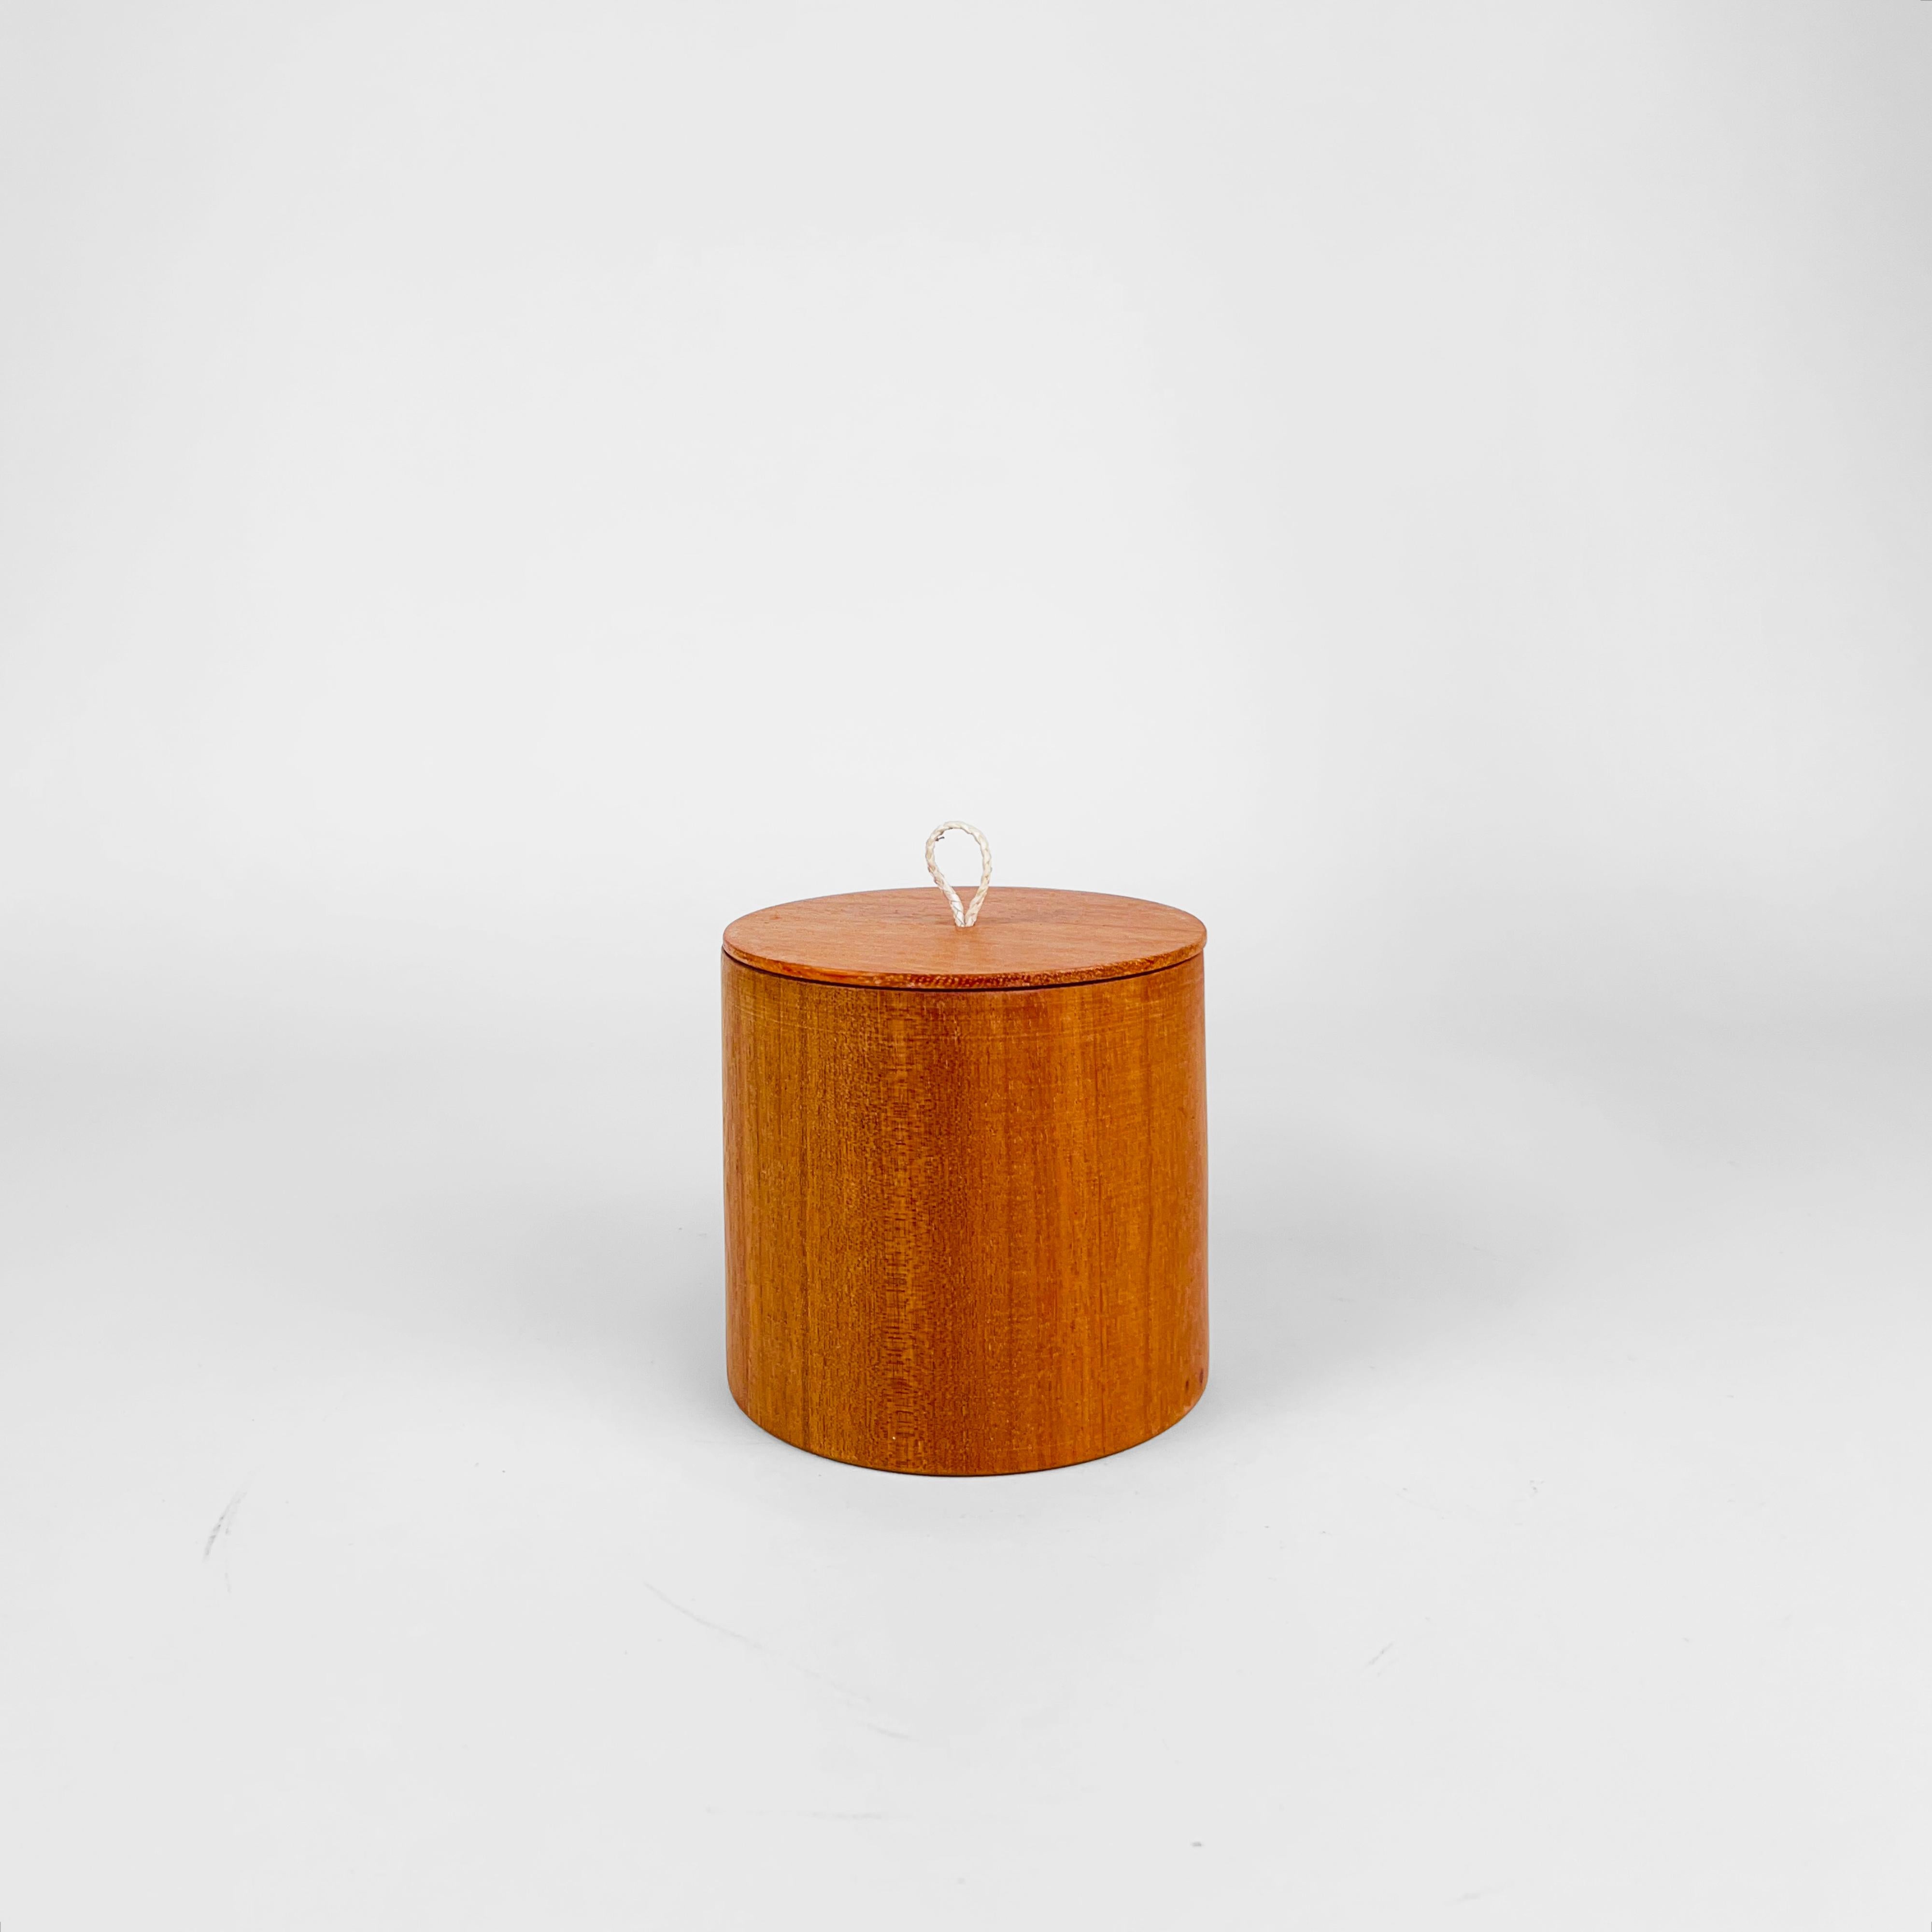 Hand-turned wooden canister by Alta Pampa, Argentina.
The piece is made in Quebracho (Hardwood). The smooth finish reveals the material beautiful grain.
The lazo style pull is made of hand-braided leather.
This piece is not stamped on the base.